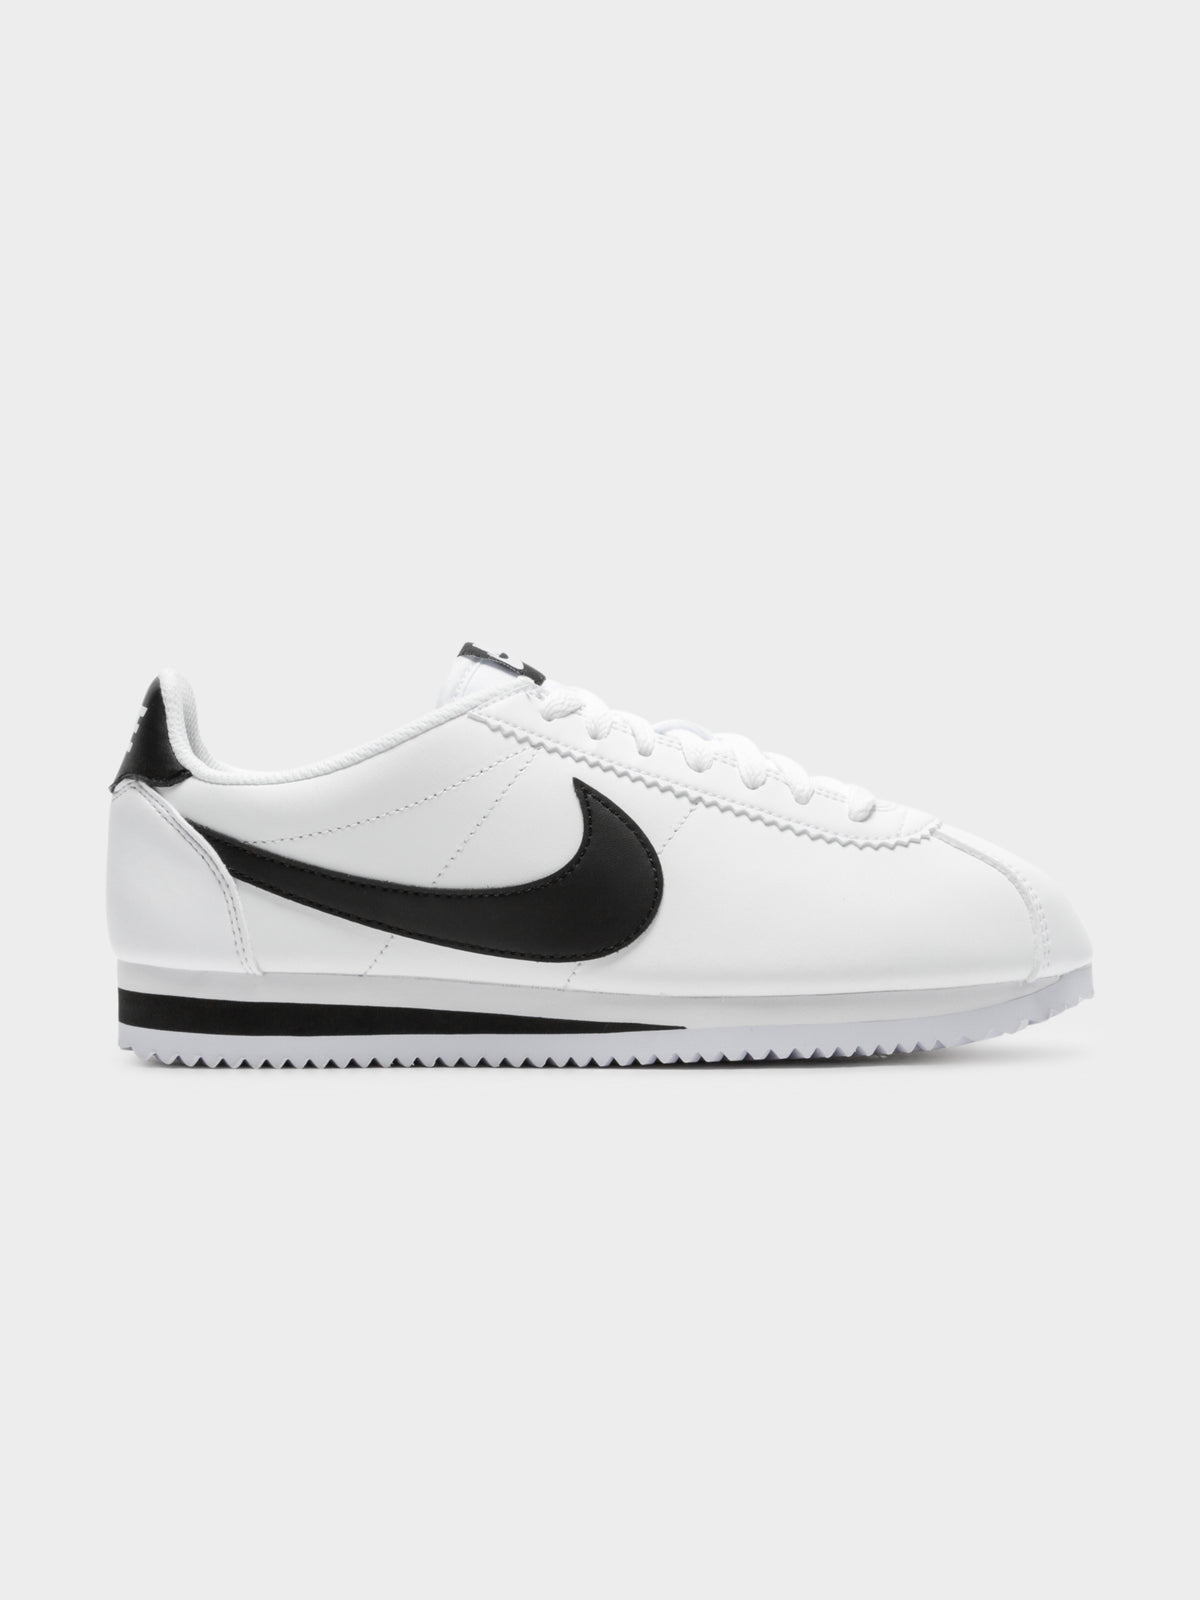 Womens Classic Cortez Leather Sneakers in White &amp; Black